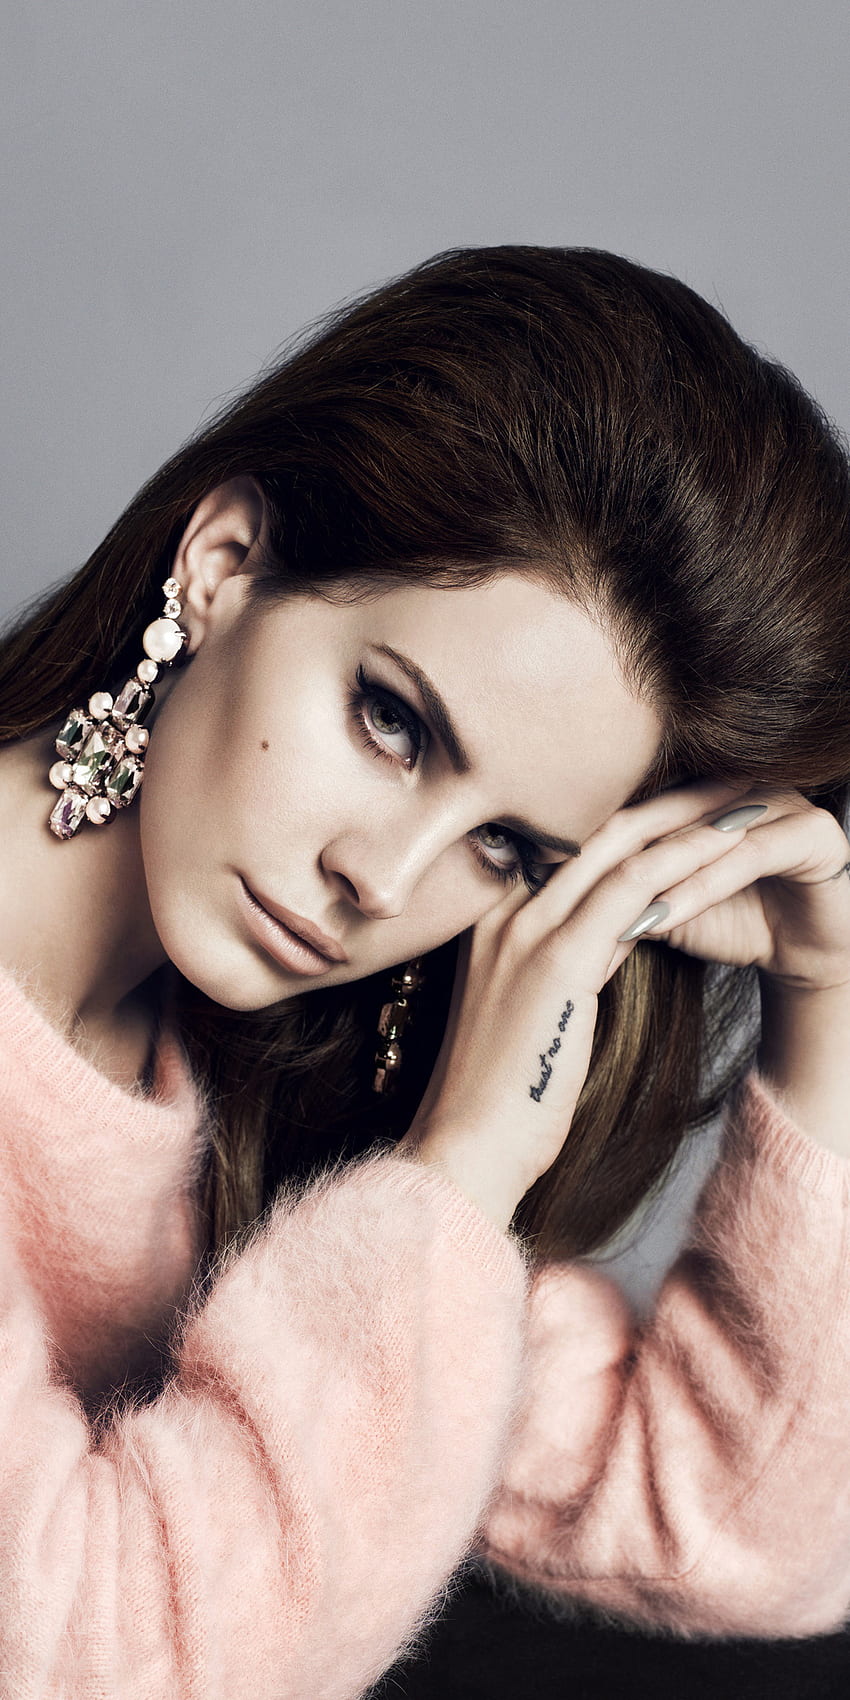 Lana Del Rey H And M 2019 One Plus 5T, Honor 7x, Honor view 10, Lg Q6 , , Background, and, Lana Del Rey Phone HD phone wallpaper